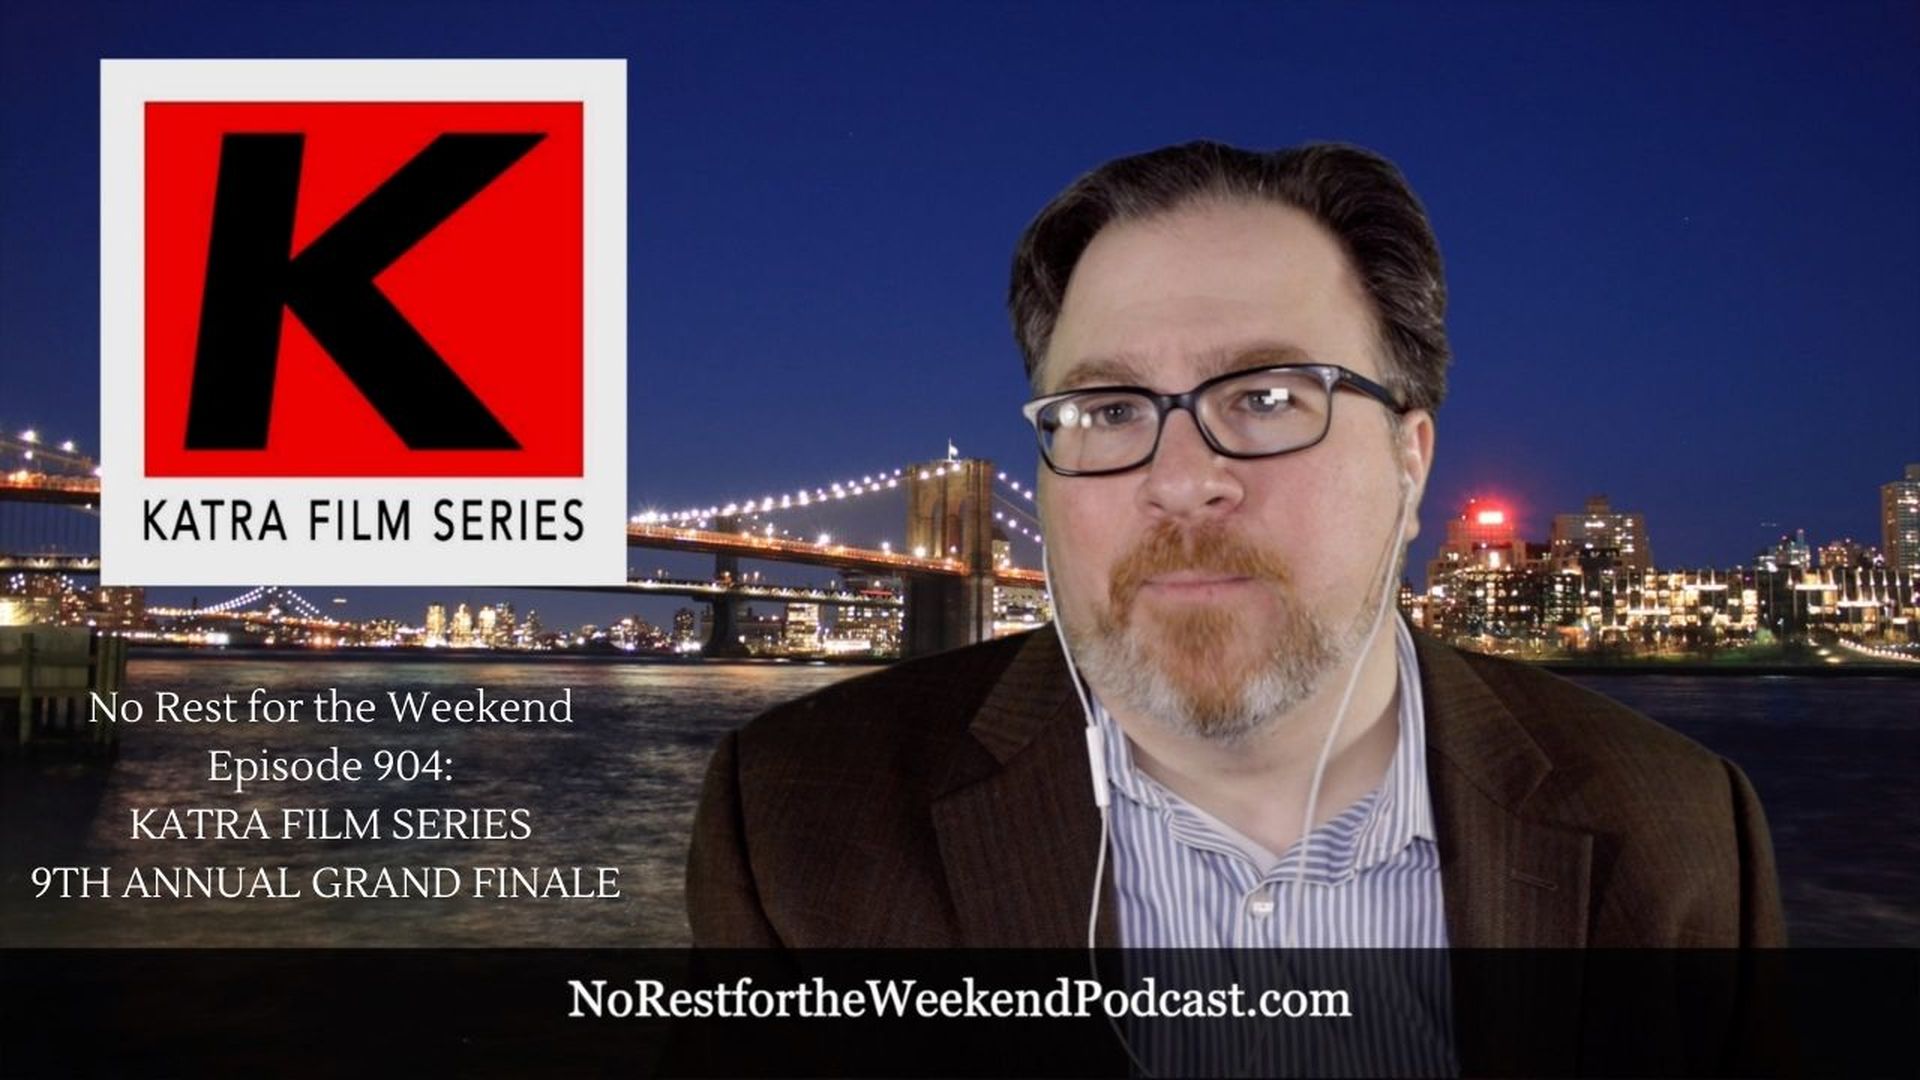 No Rest for the Weekend Episode 904: The 9th Annual Katra Film Series Grand Finale